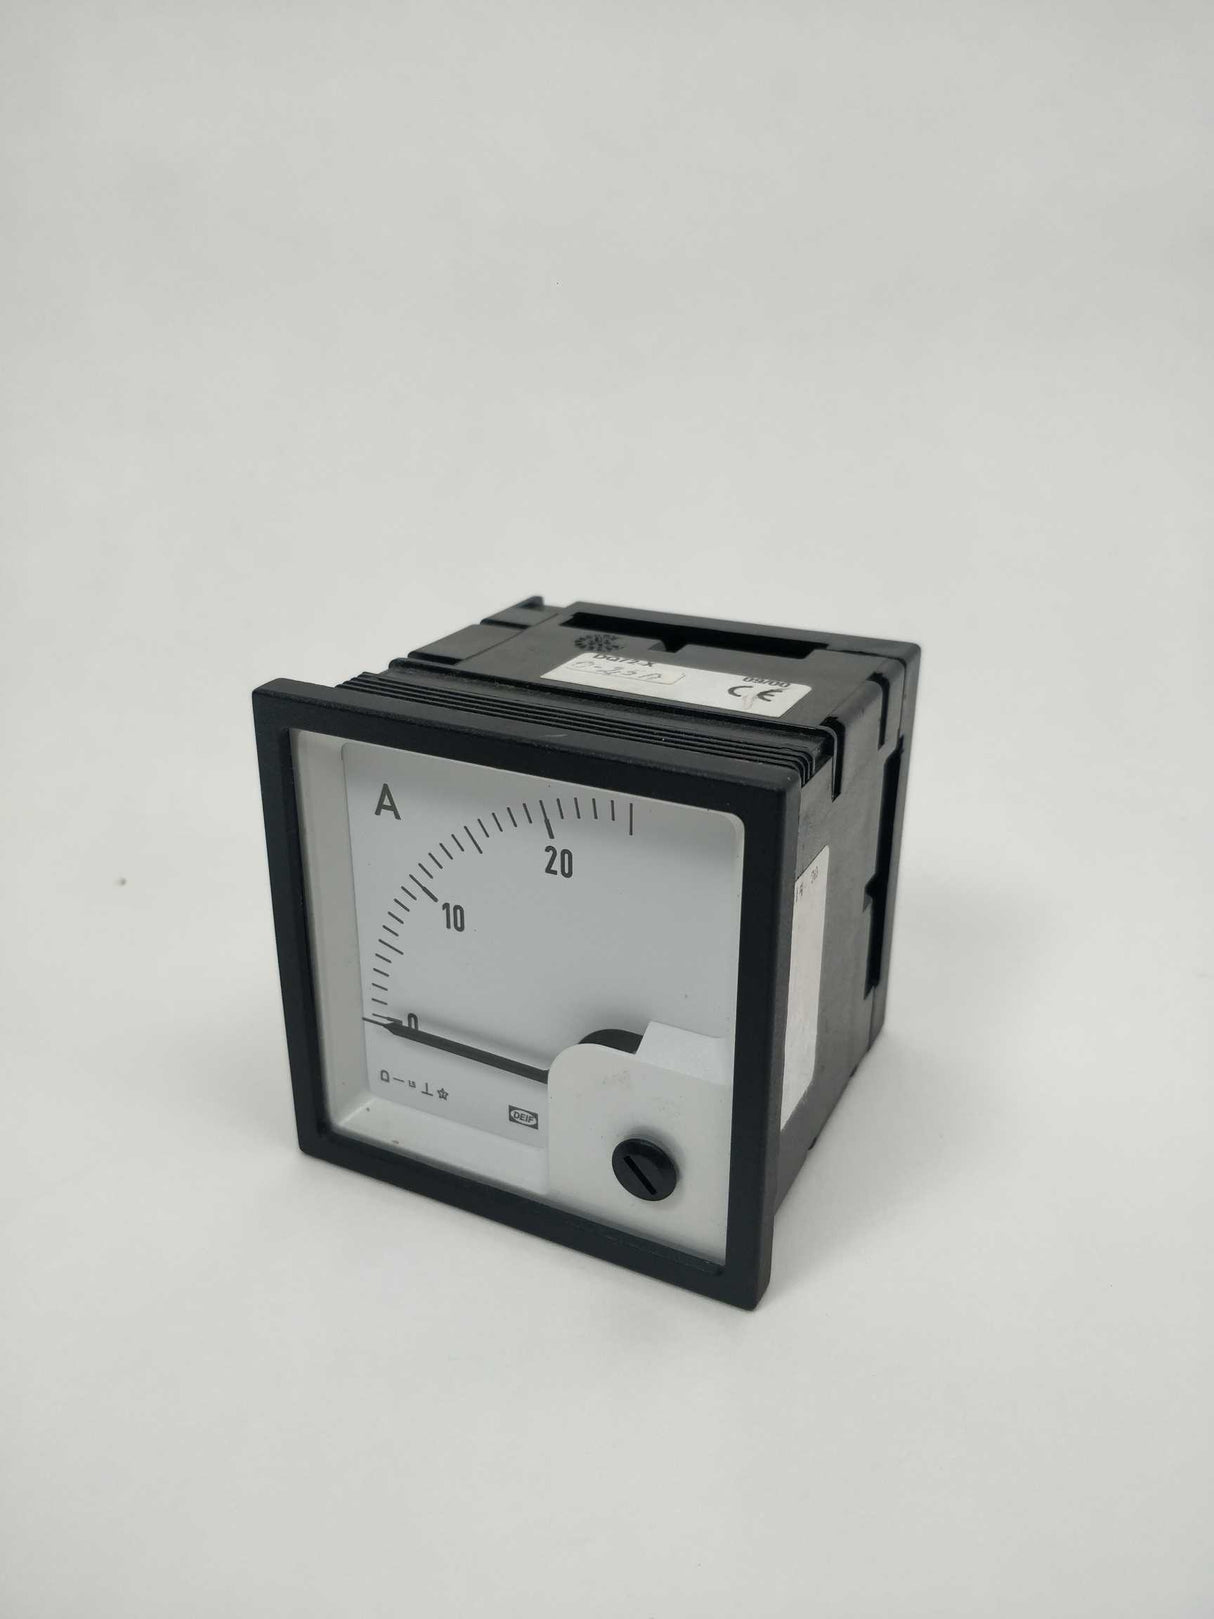 Deif DQ72-X Measuring device for ampere